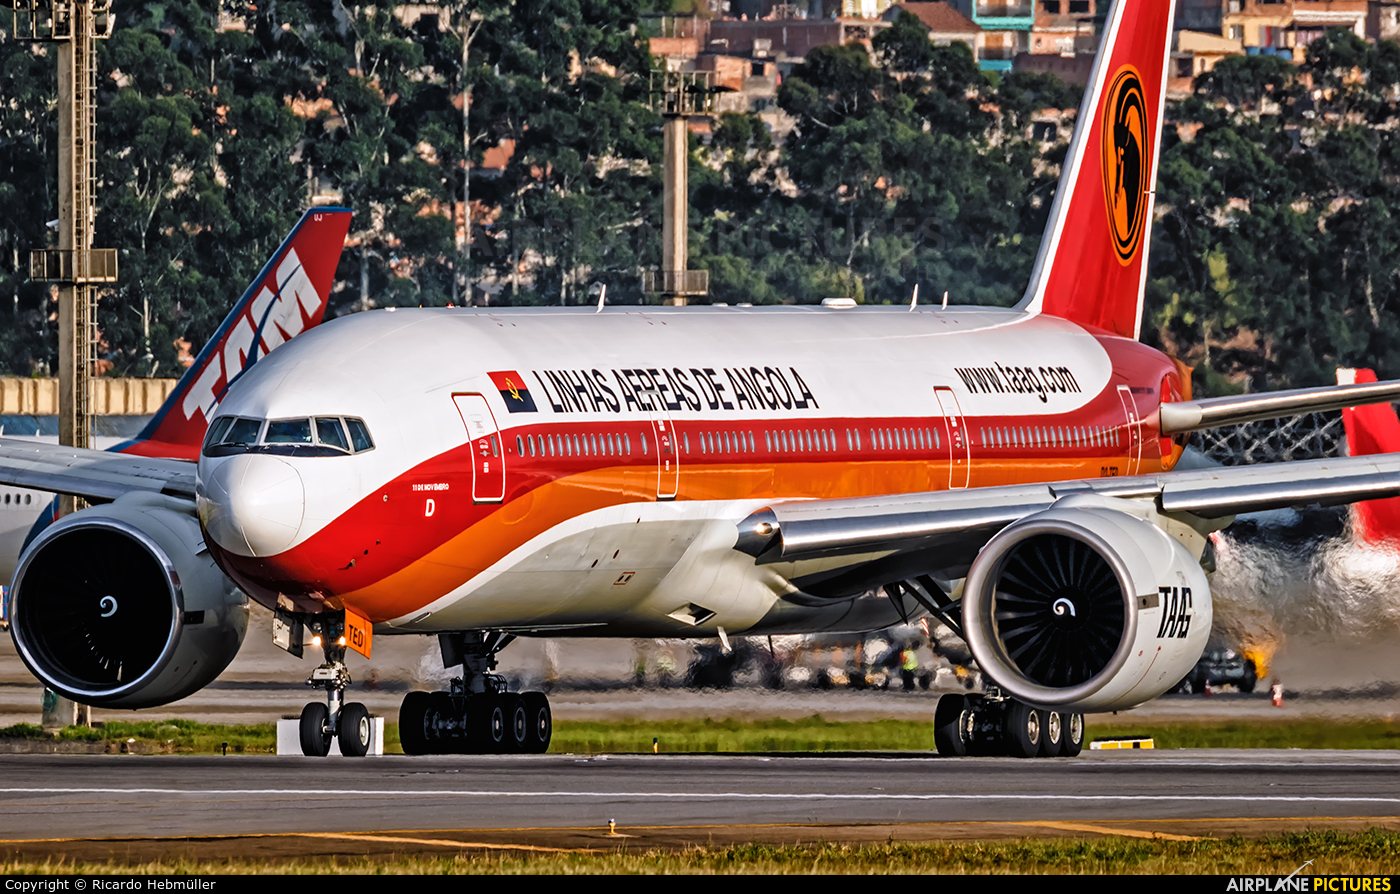 TAAG - Angola Airlines D2-TED aircraft at São Paulo - Guarulhos